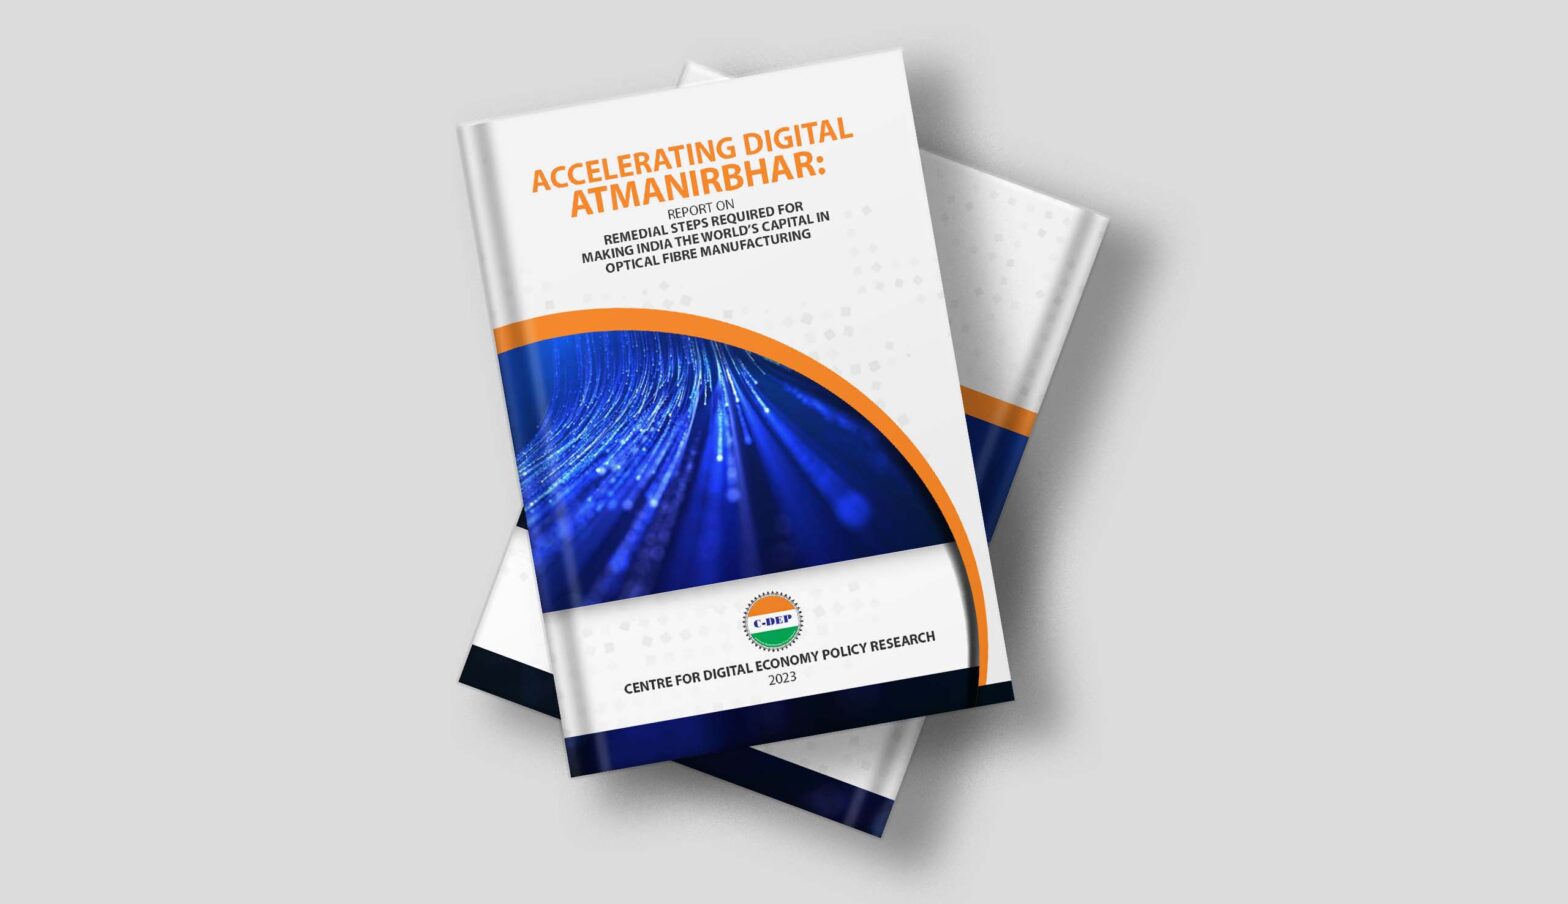 Accelerating Digital Atmanirbhar: Report on Remedial Steps Required for Making India the World's Capital in Optical Fibre Manufacturing